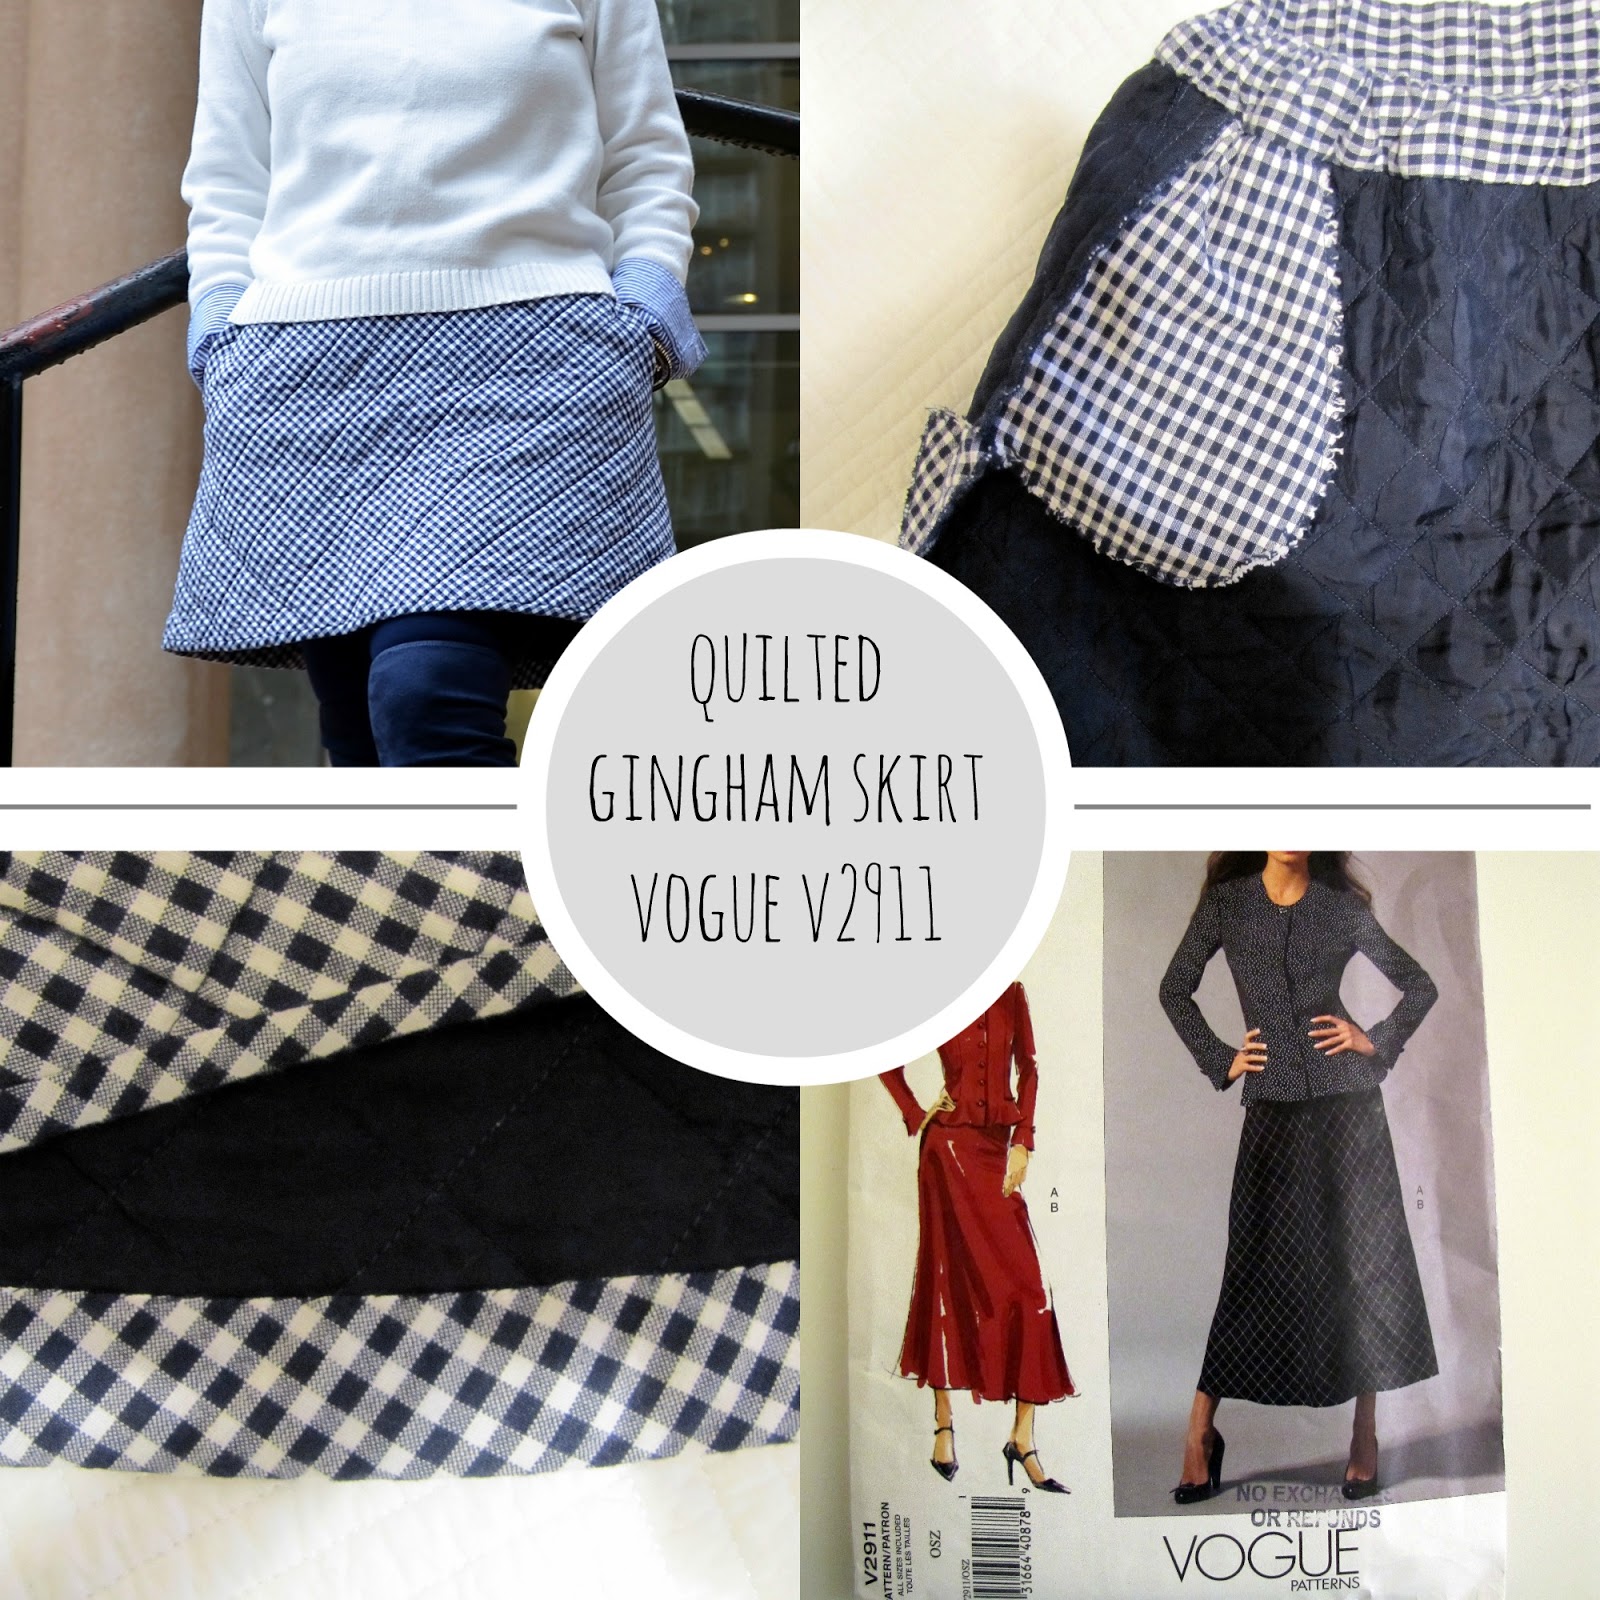 A-Colourful-Canvas, Quilted-Gingham-Skirt, Vogue-V2911